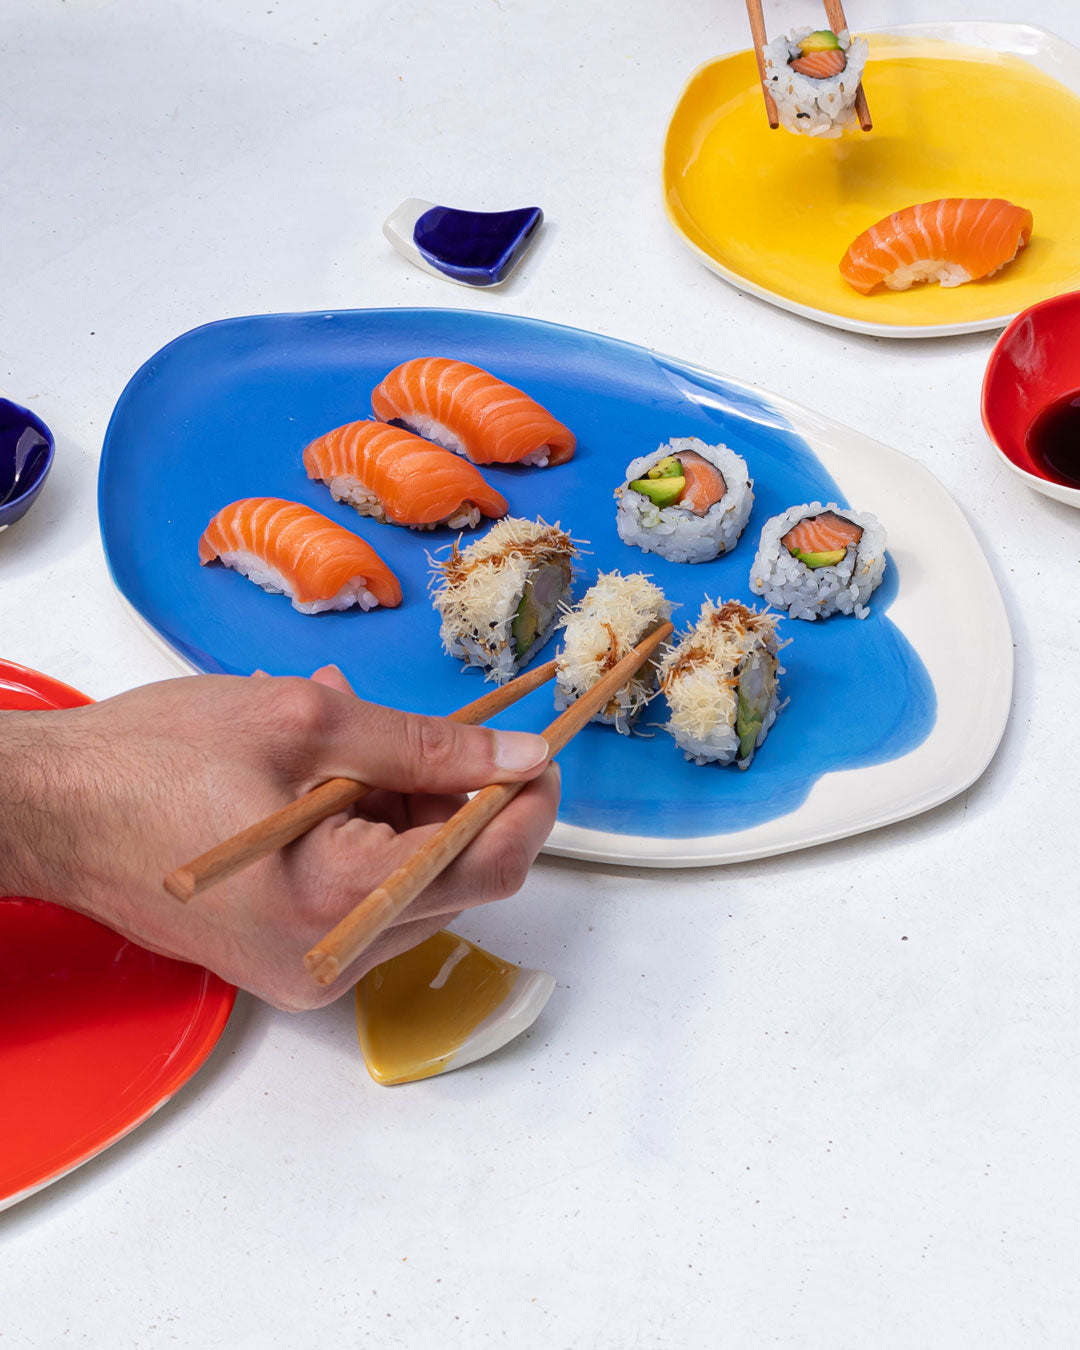 Tognana 7-piece Sushi set for two people + complimentary